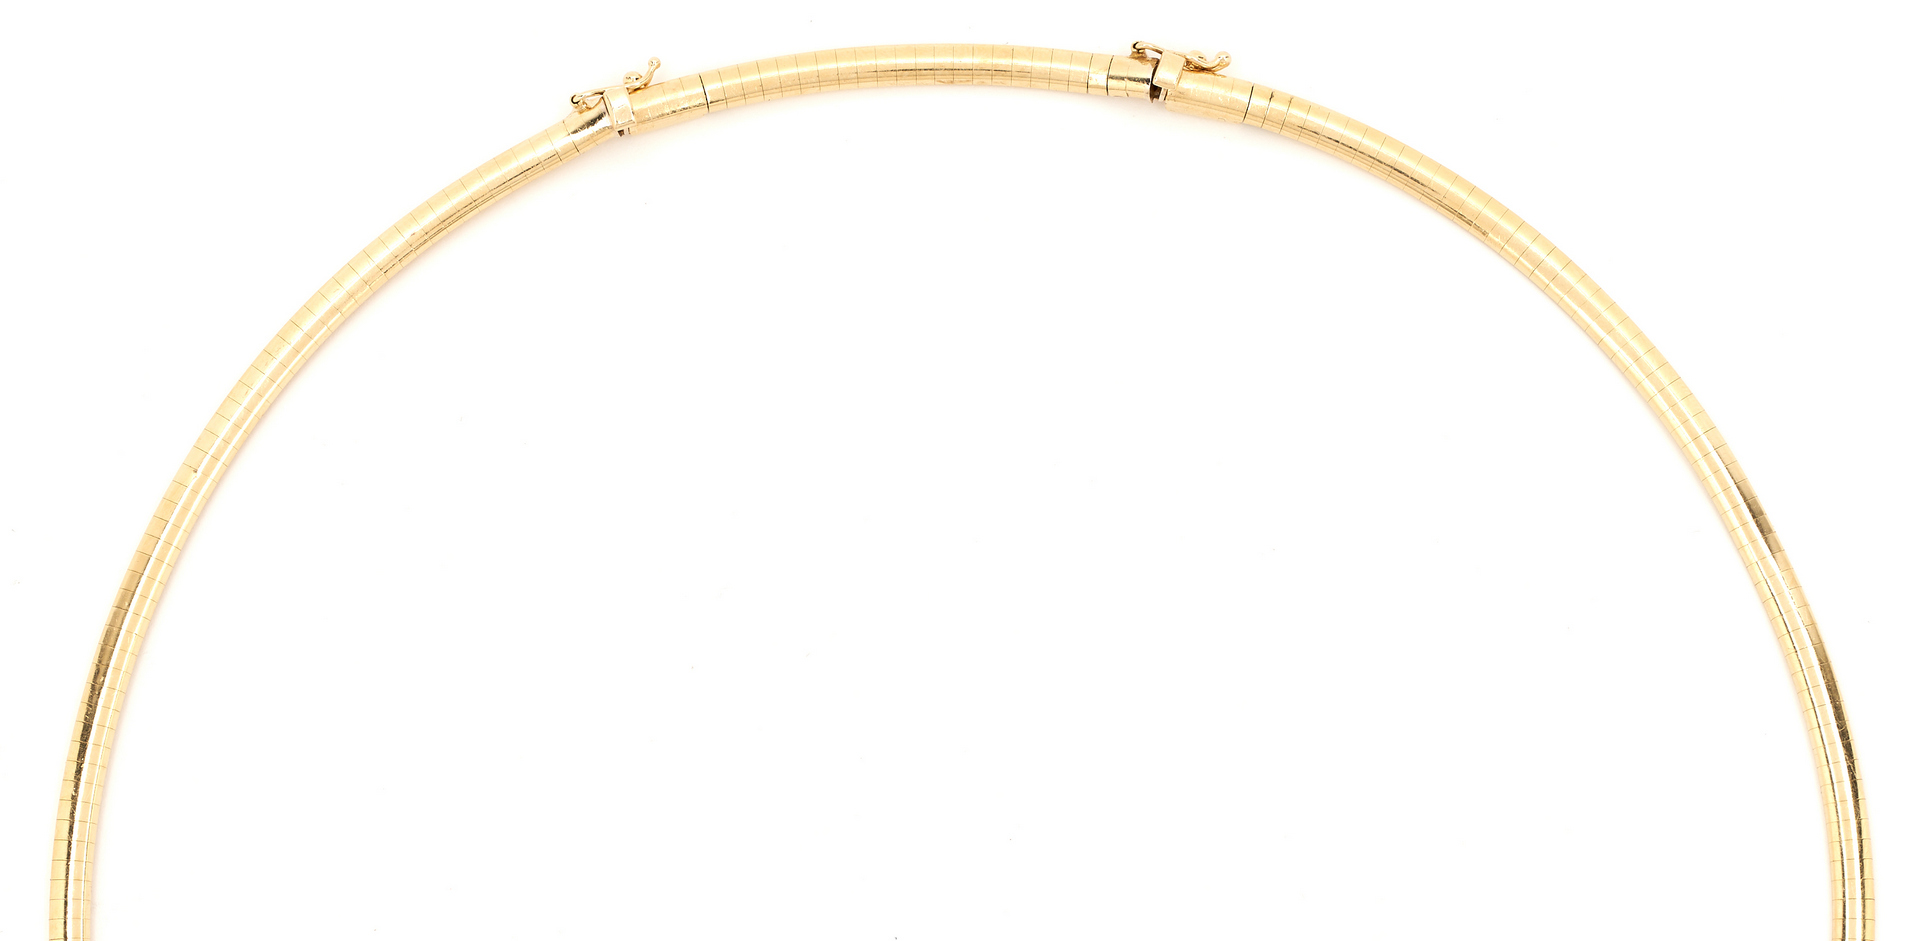 Lot 262: Ladies 21" 14K Yellow Gold Omega Style Necklace